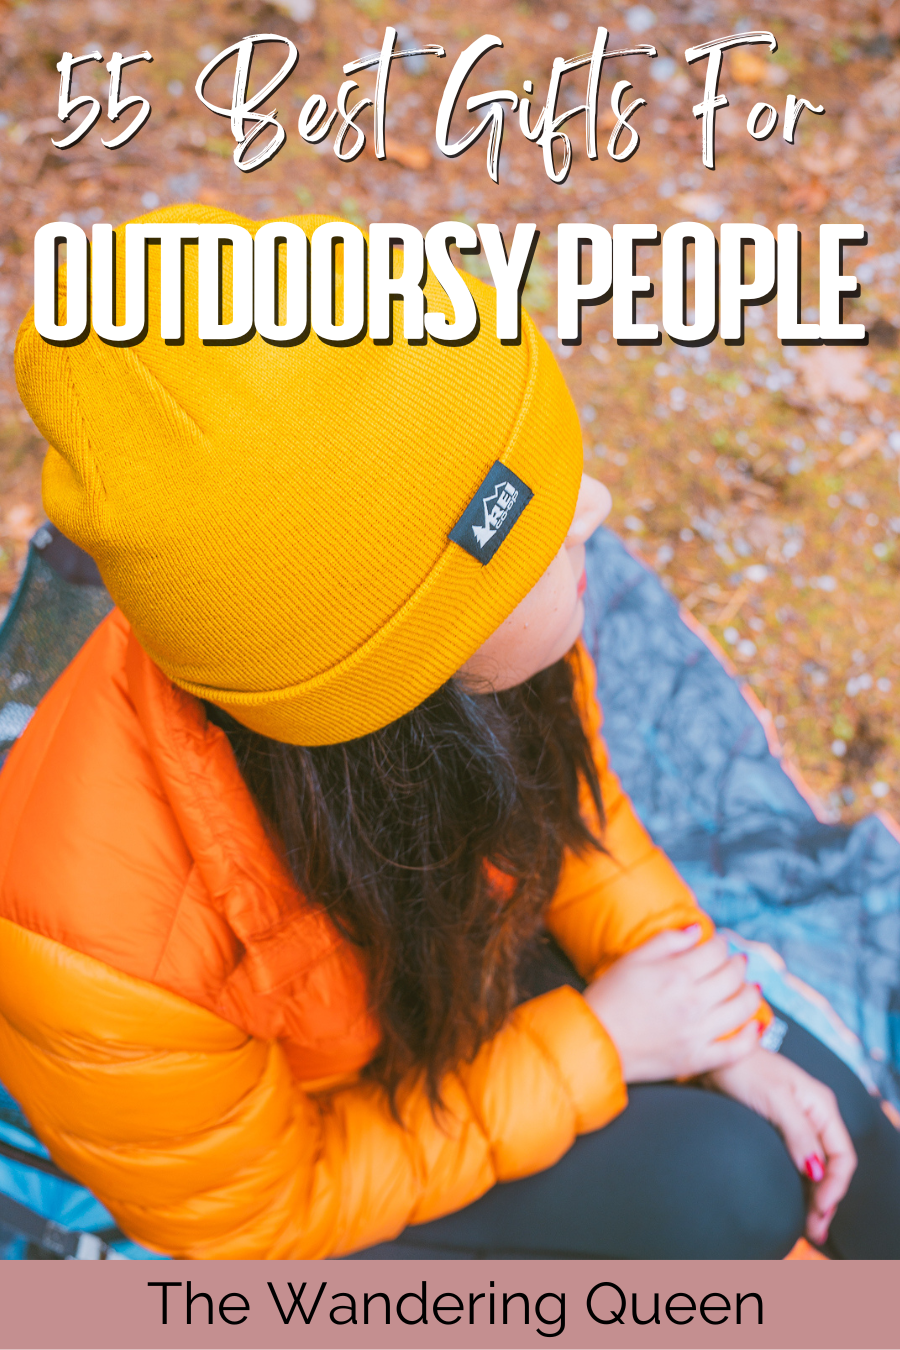 85 Best Gifts for Outdoor Lovers: Ideas for Hikers, Campers, Travelers &  More – Bearfoot Theory